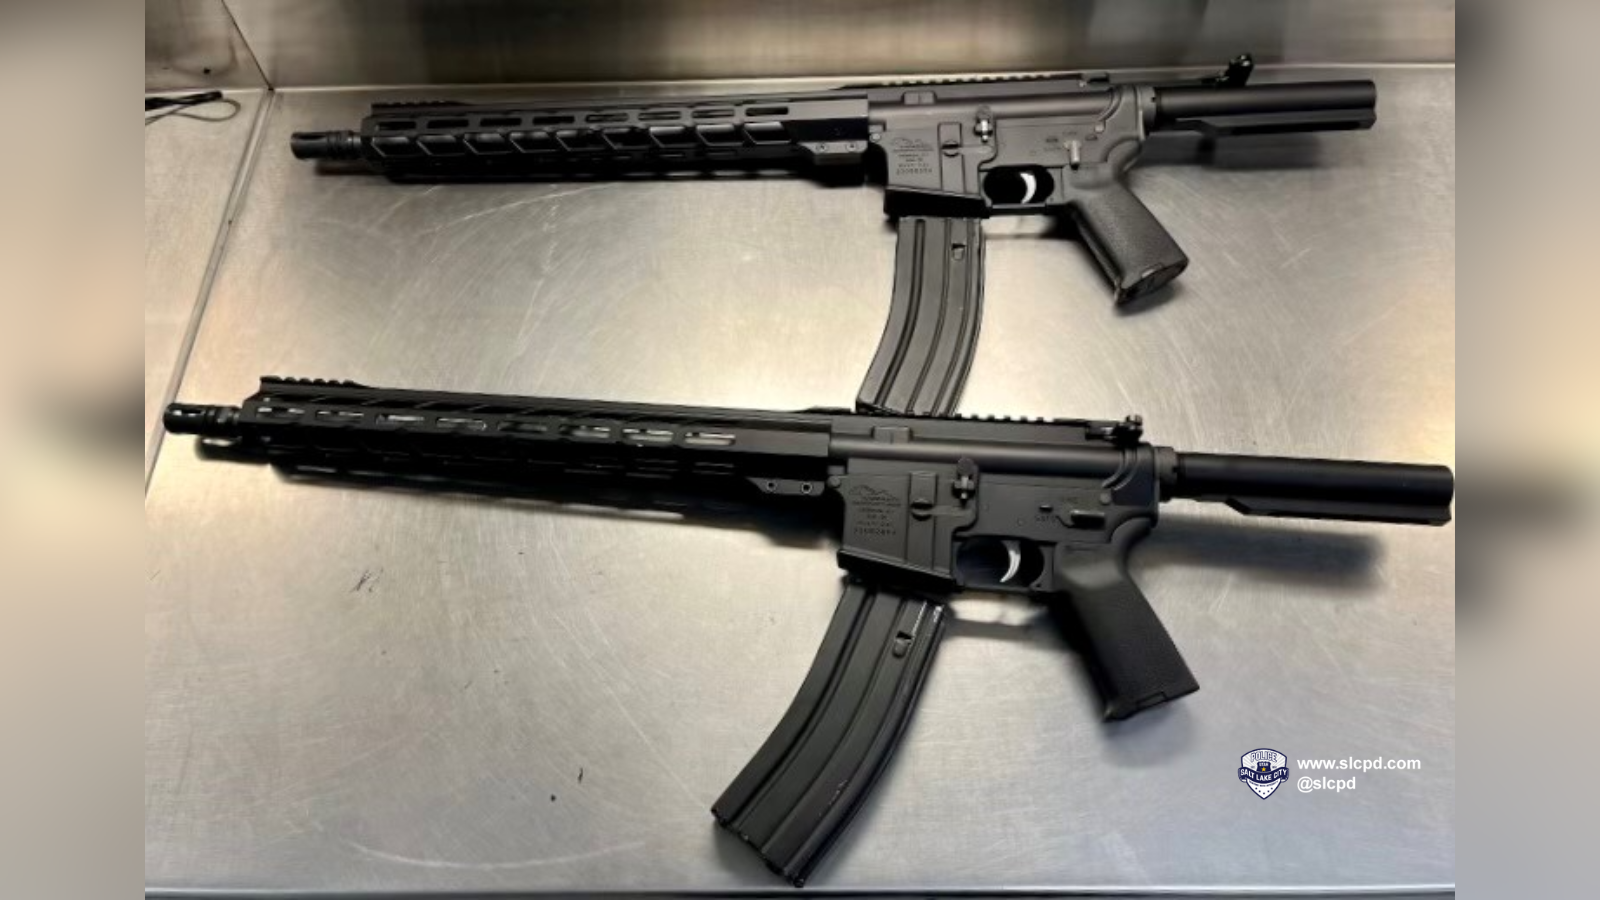 Salt Lake City police said they arrested two men for illegal possession of a firearm and recovered ...